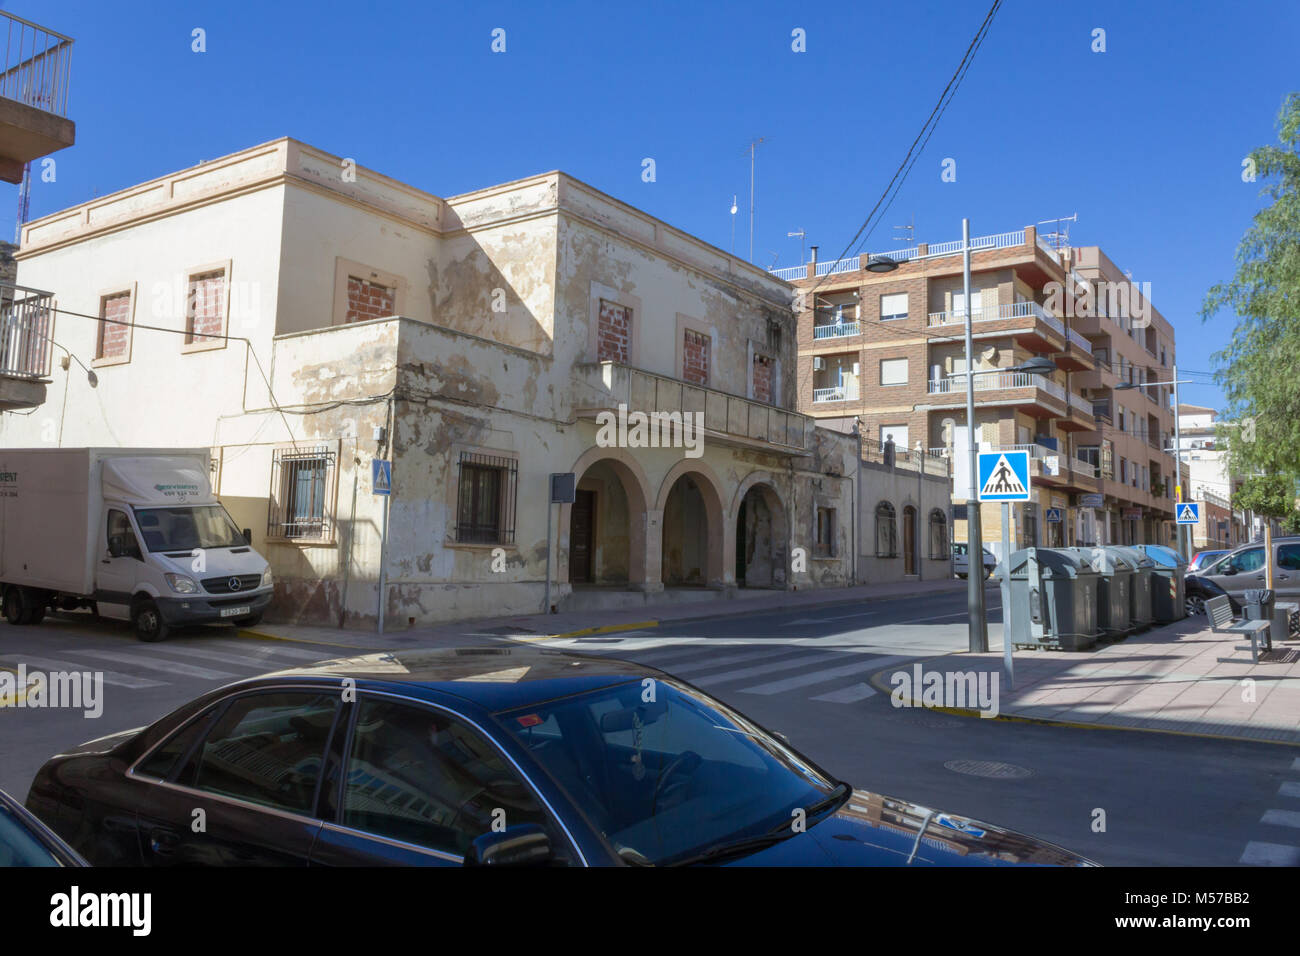 Old Disused Building in Albox Town center, Almeria province, Andalucía, Spain Stock Photo